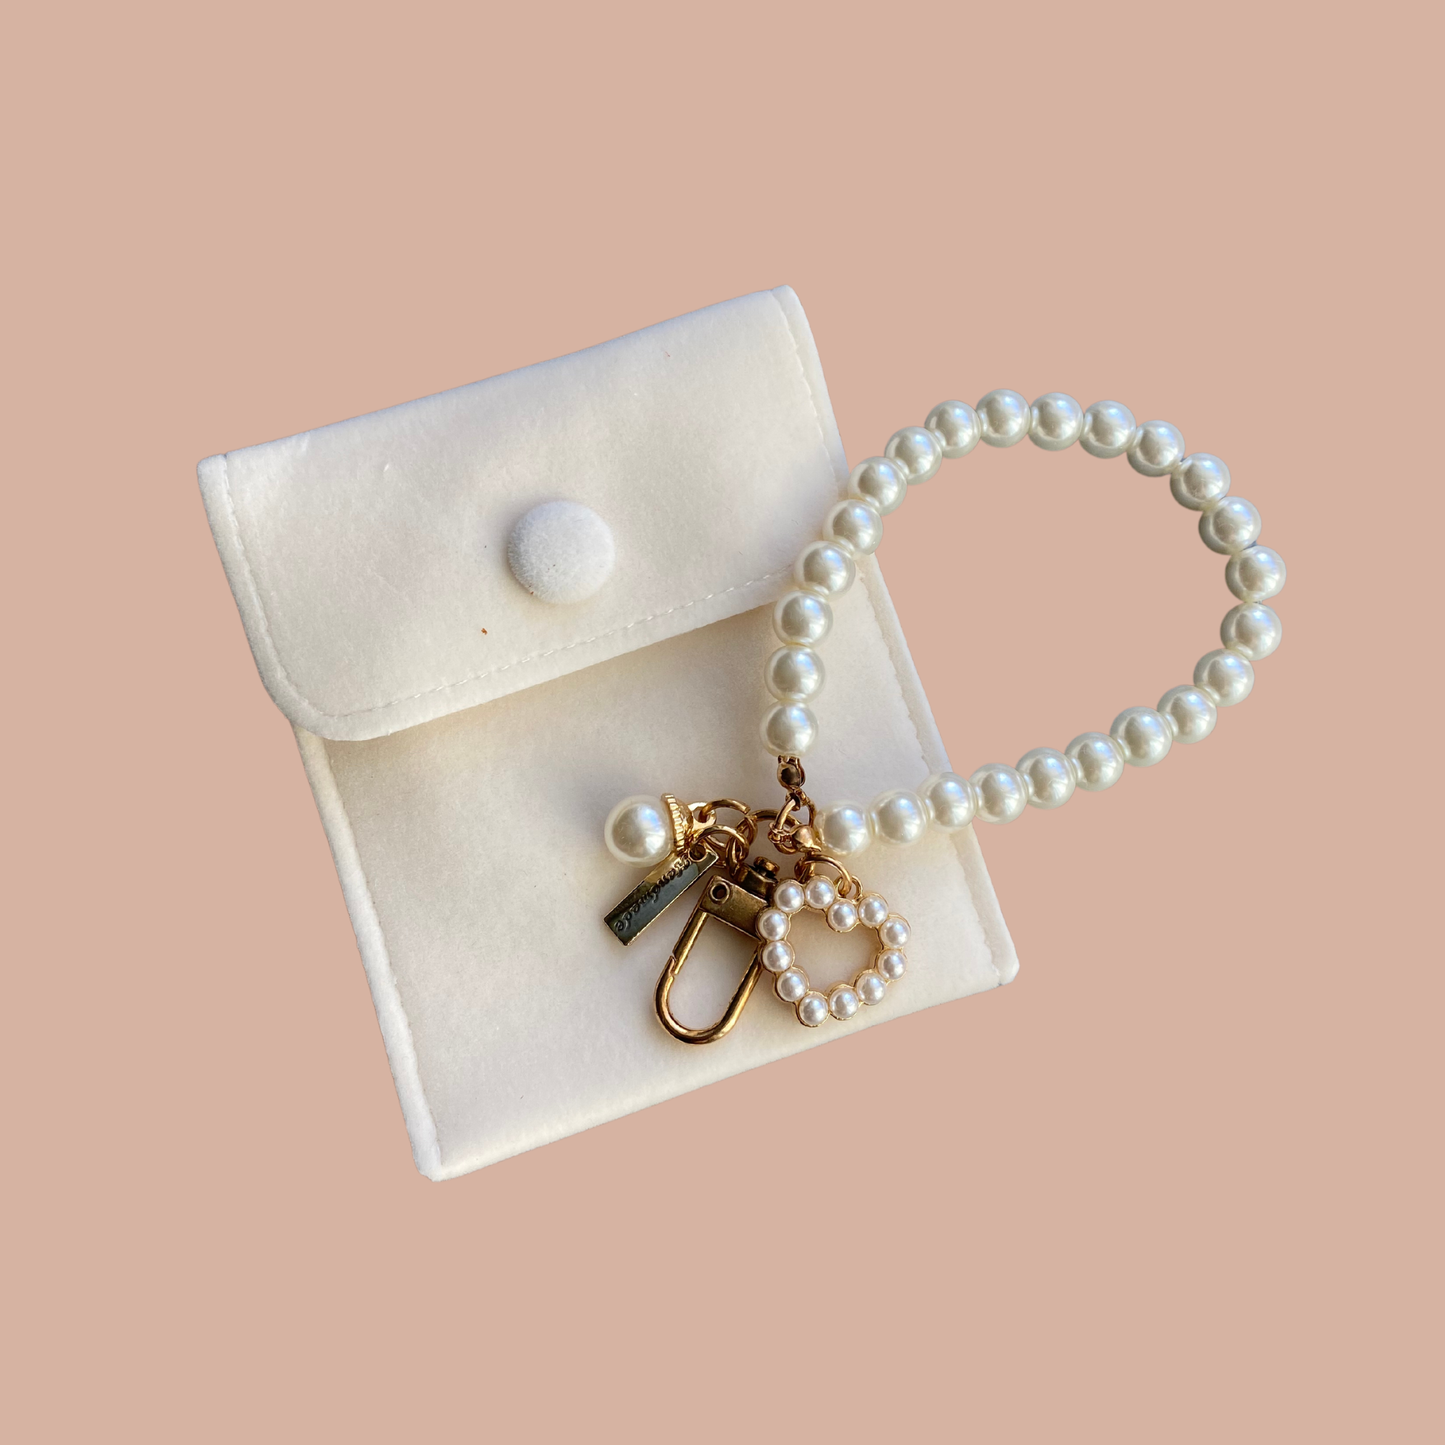 Faux Pearl KeychainFaux, AirPods Case Chain: Wrist Heart